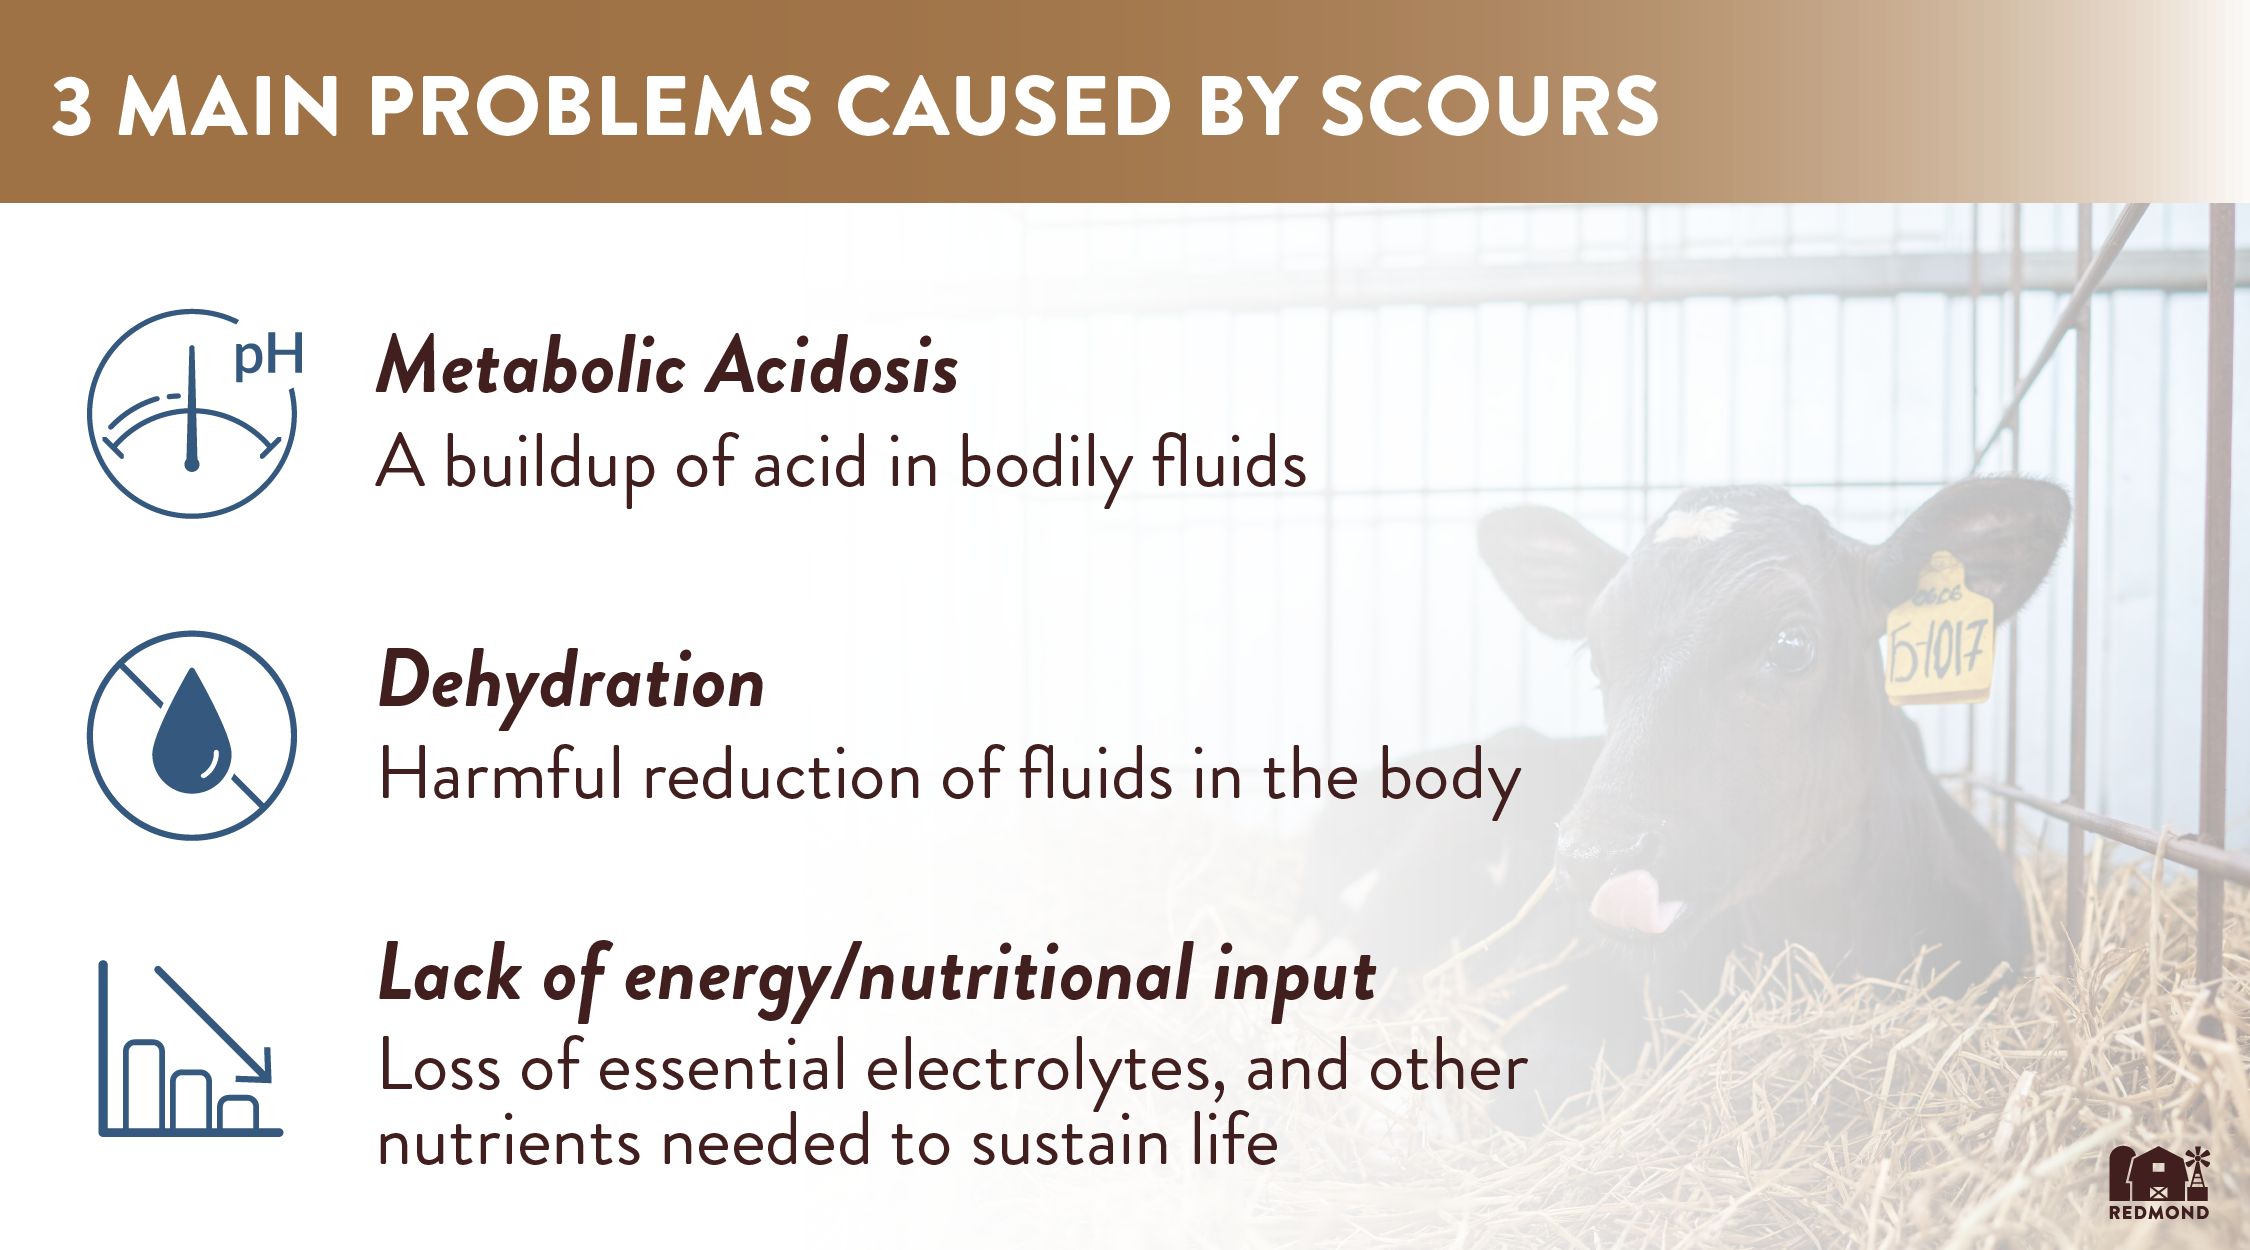 3 main problems caused by scours